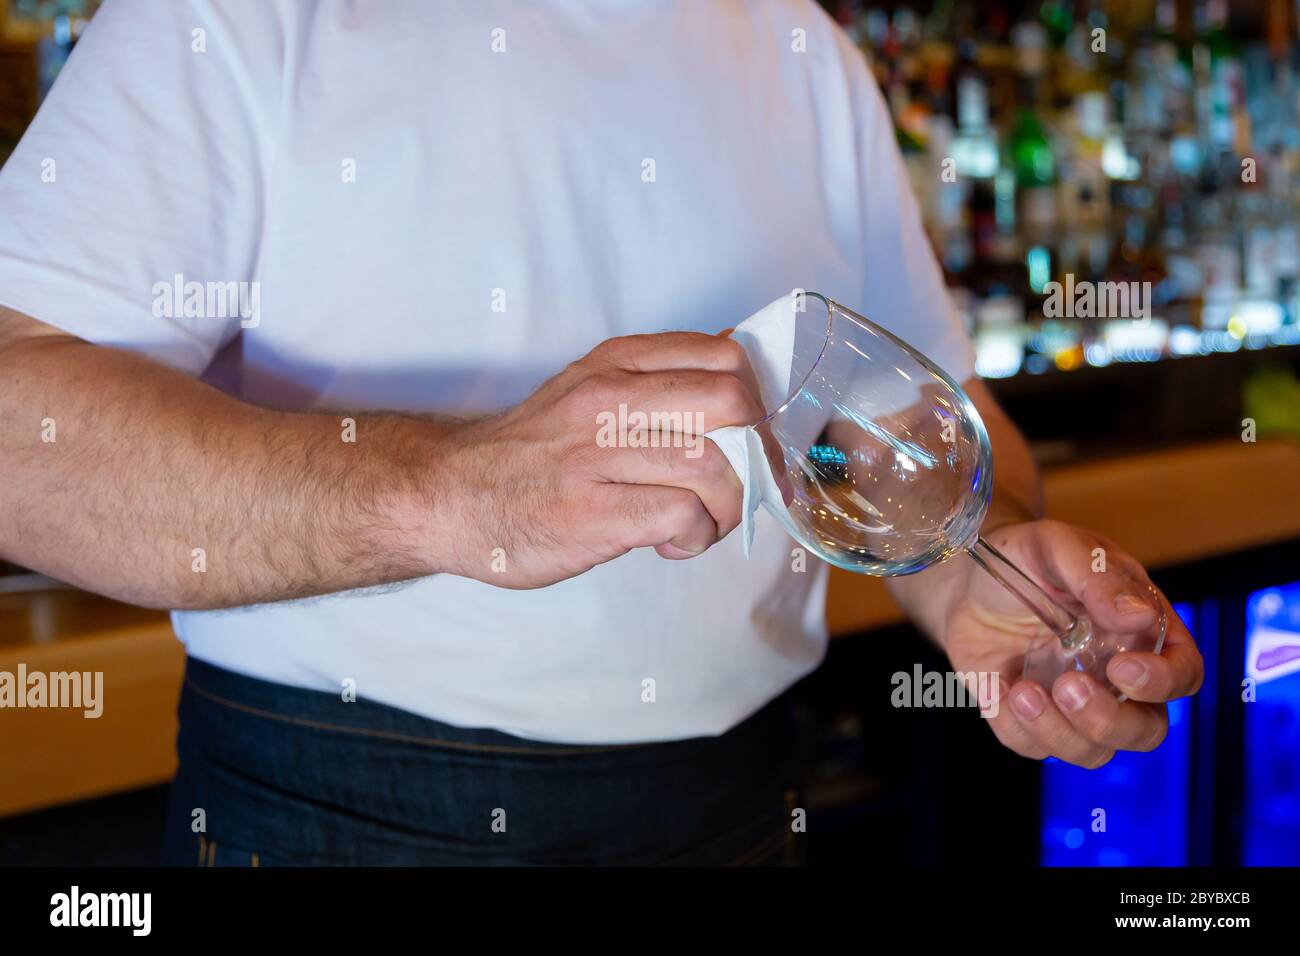 Bartender at the Bar Cleaning a Glass. Stock Photo